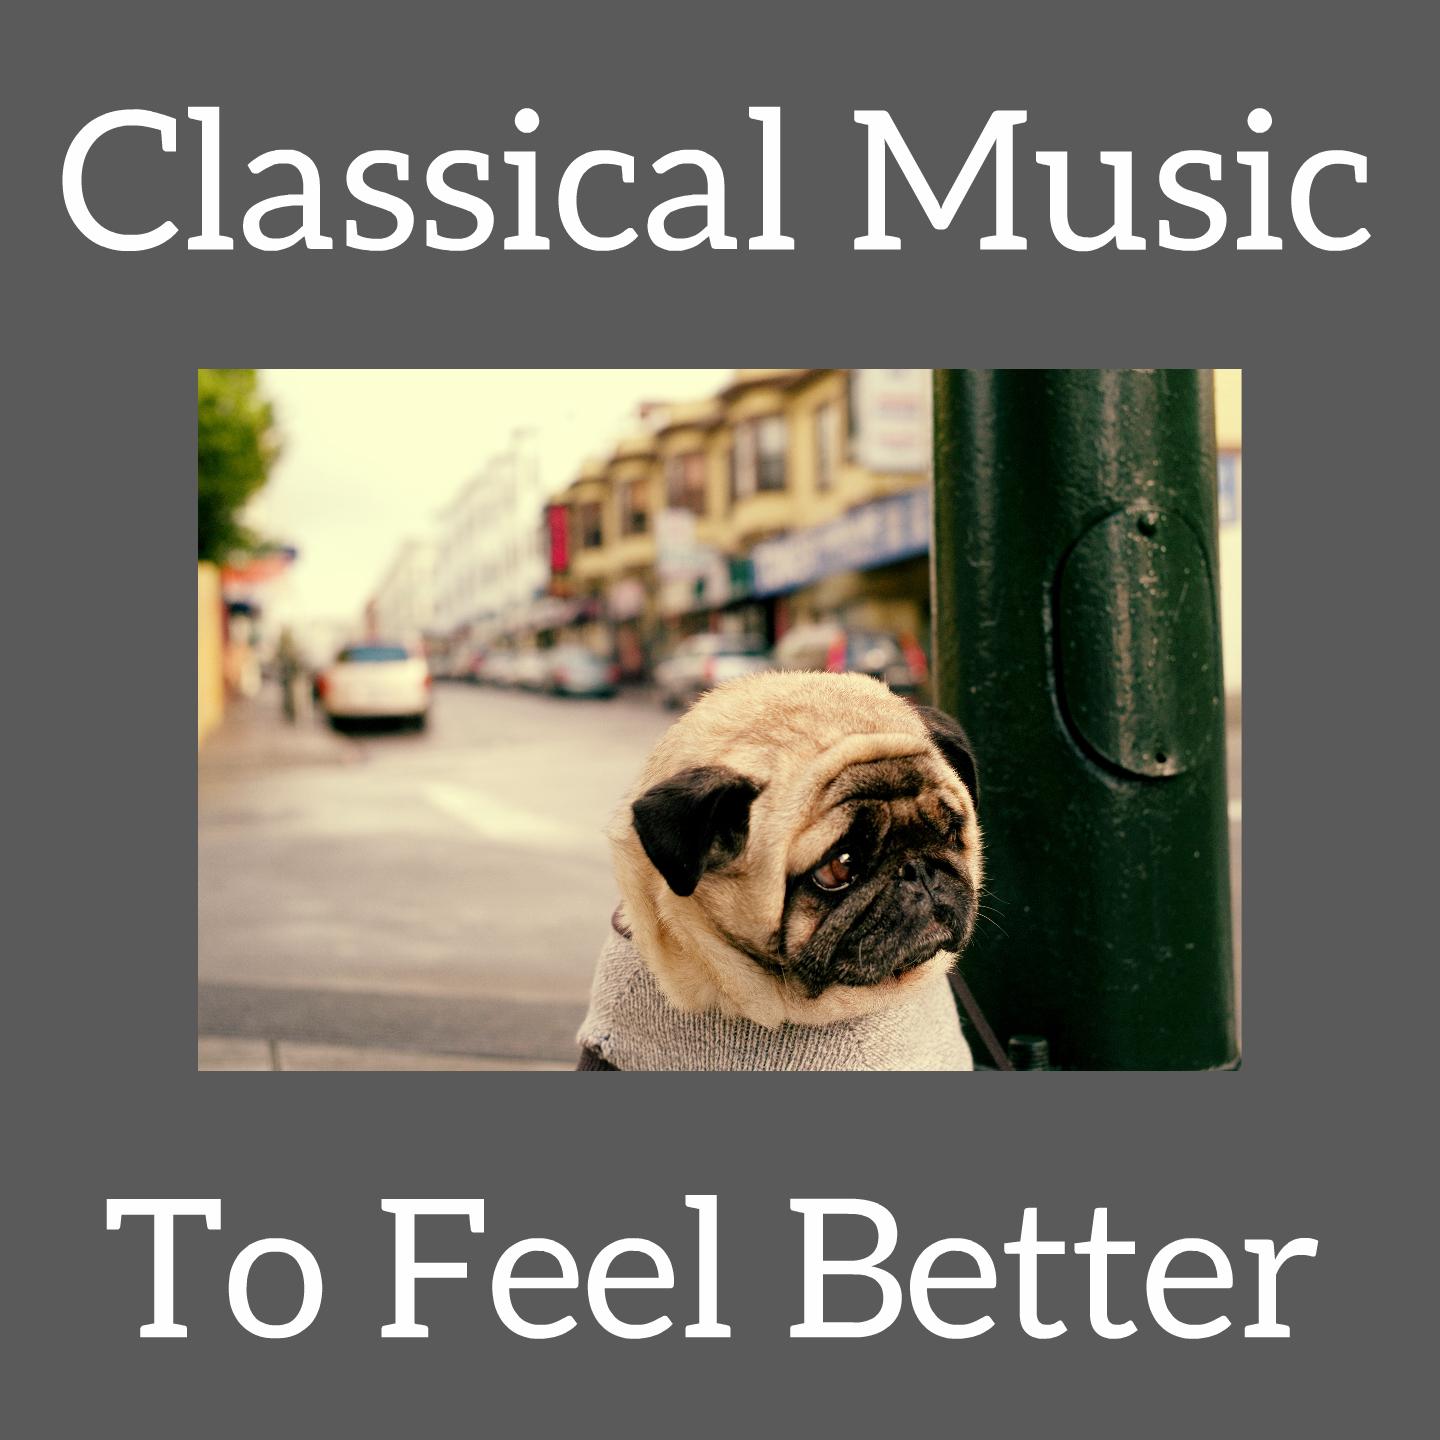 Classical Music To Feel Better